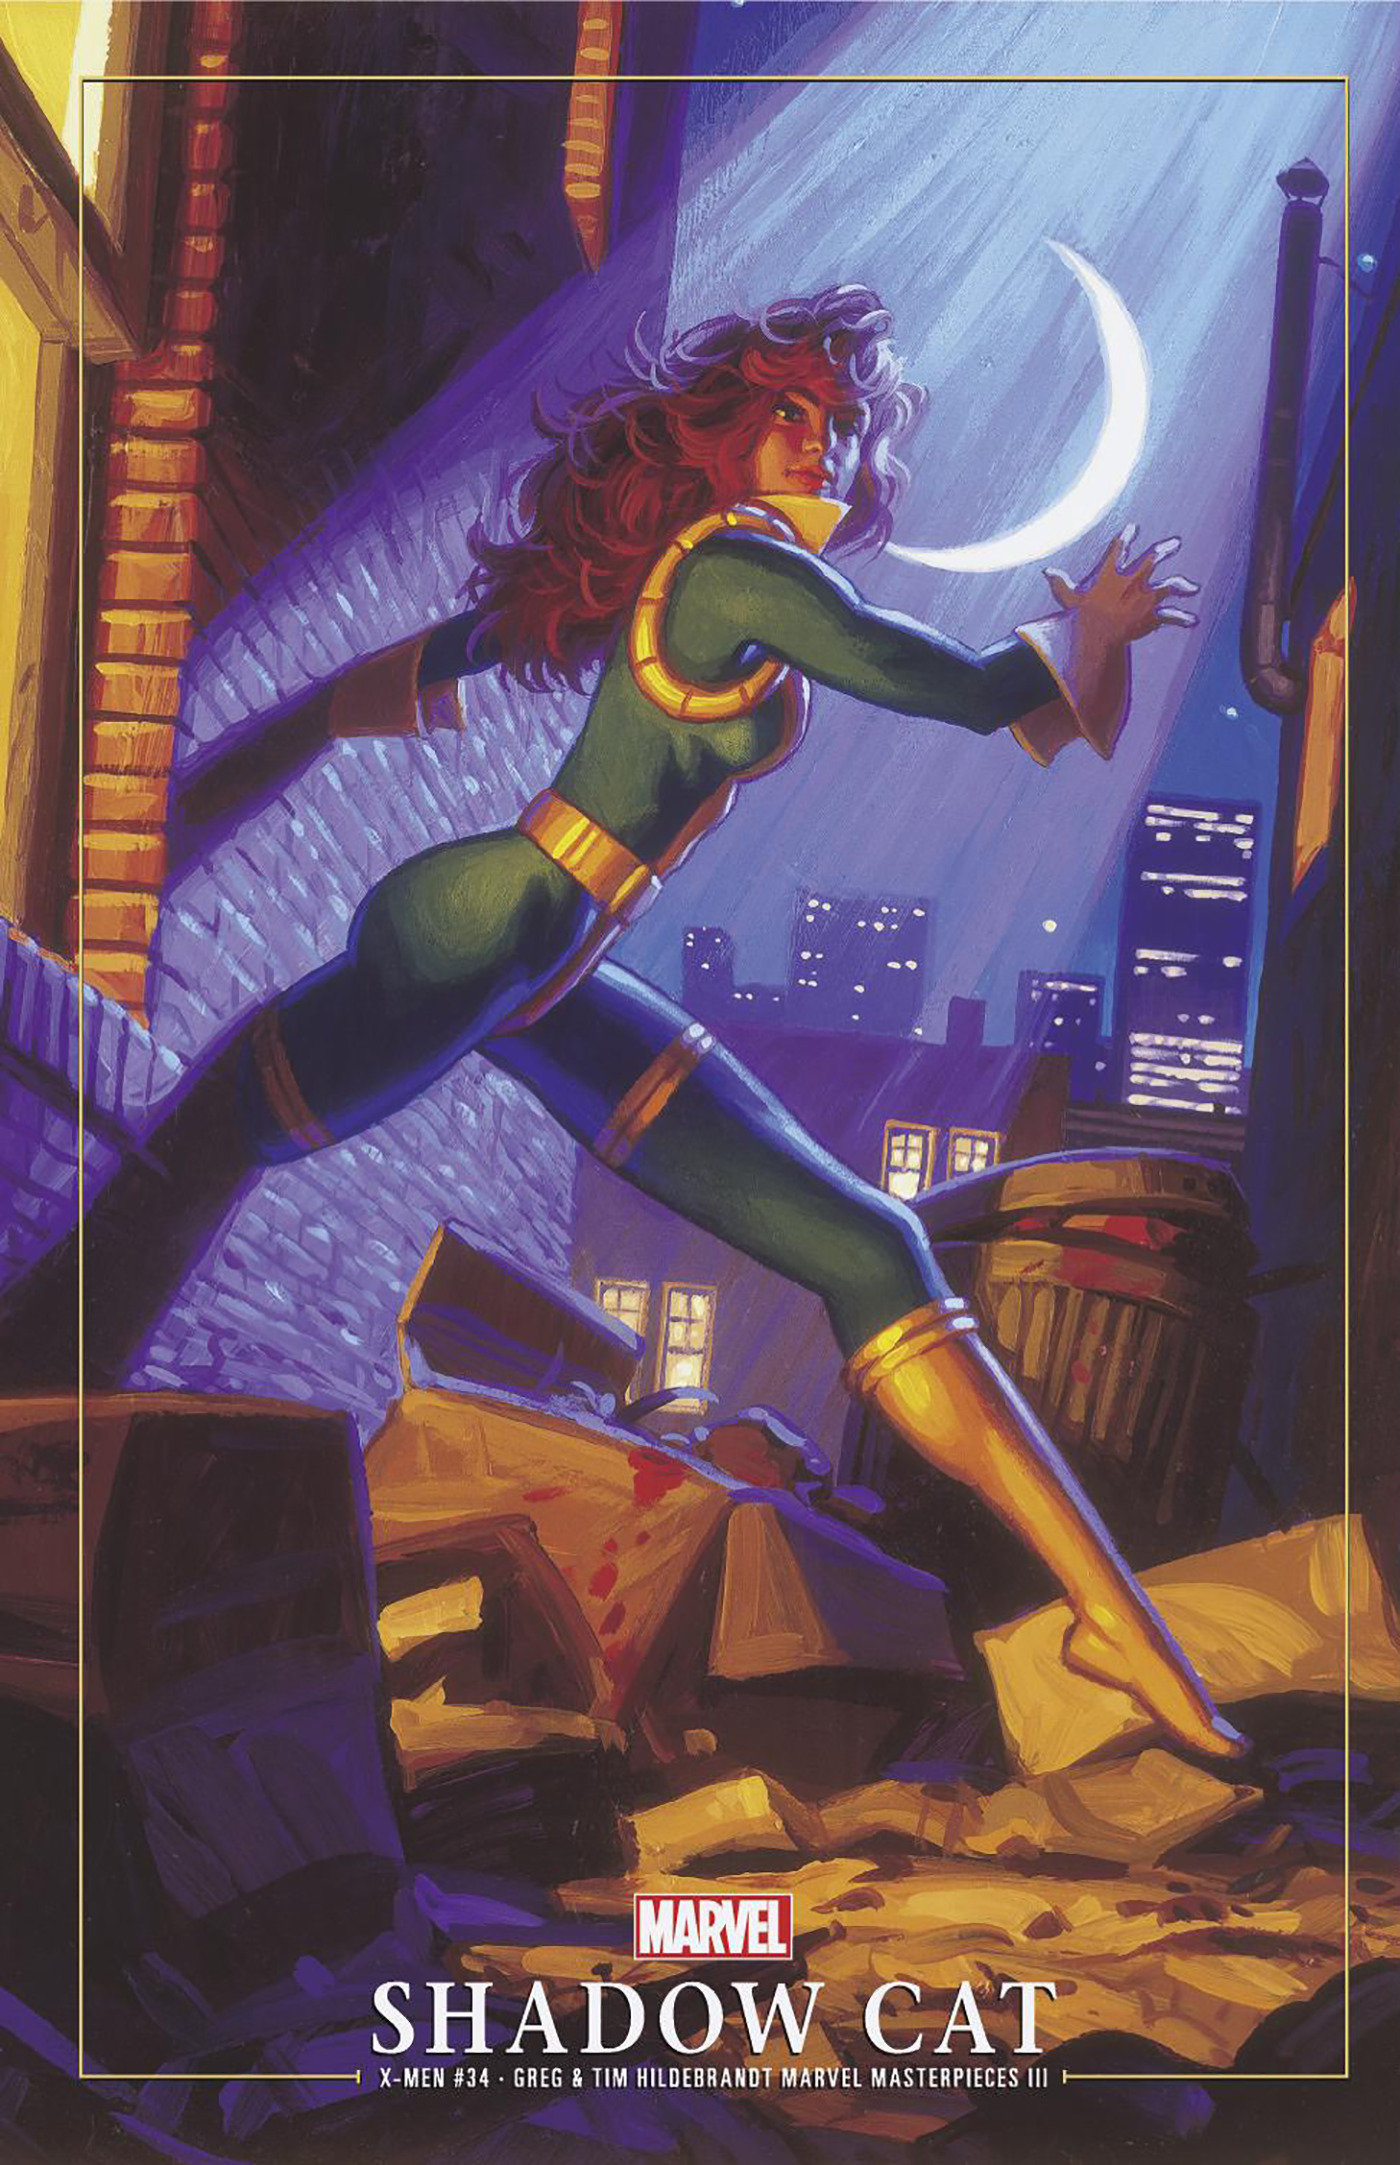 X-Men #34 Greg And Tim Hildebrandt Shadowcat Marvel Masterpieces III Variant (Fall of the House of X) (2021)